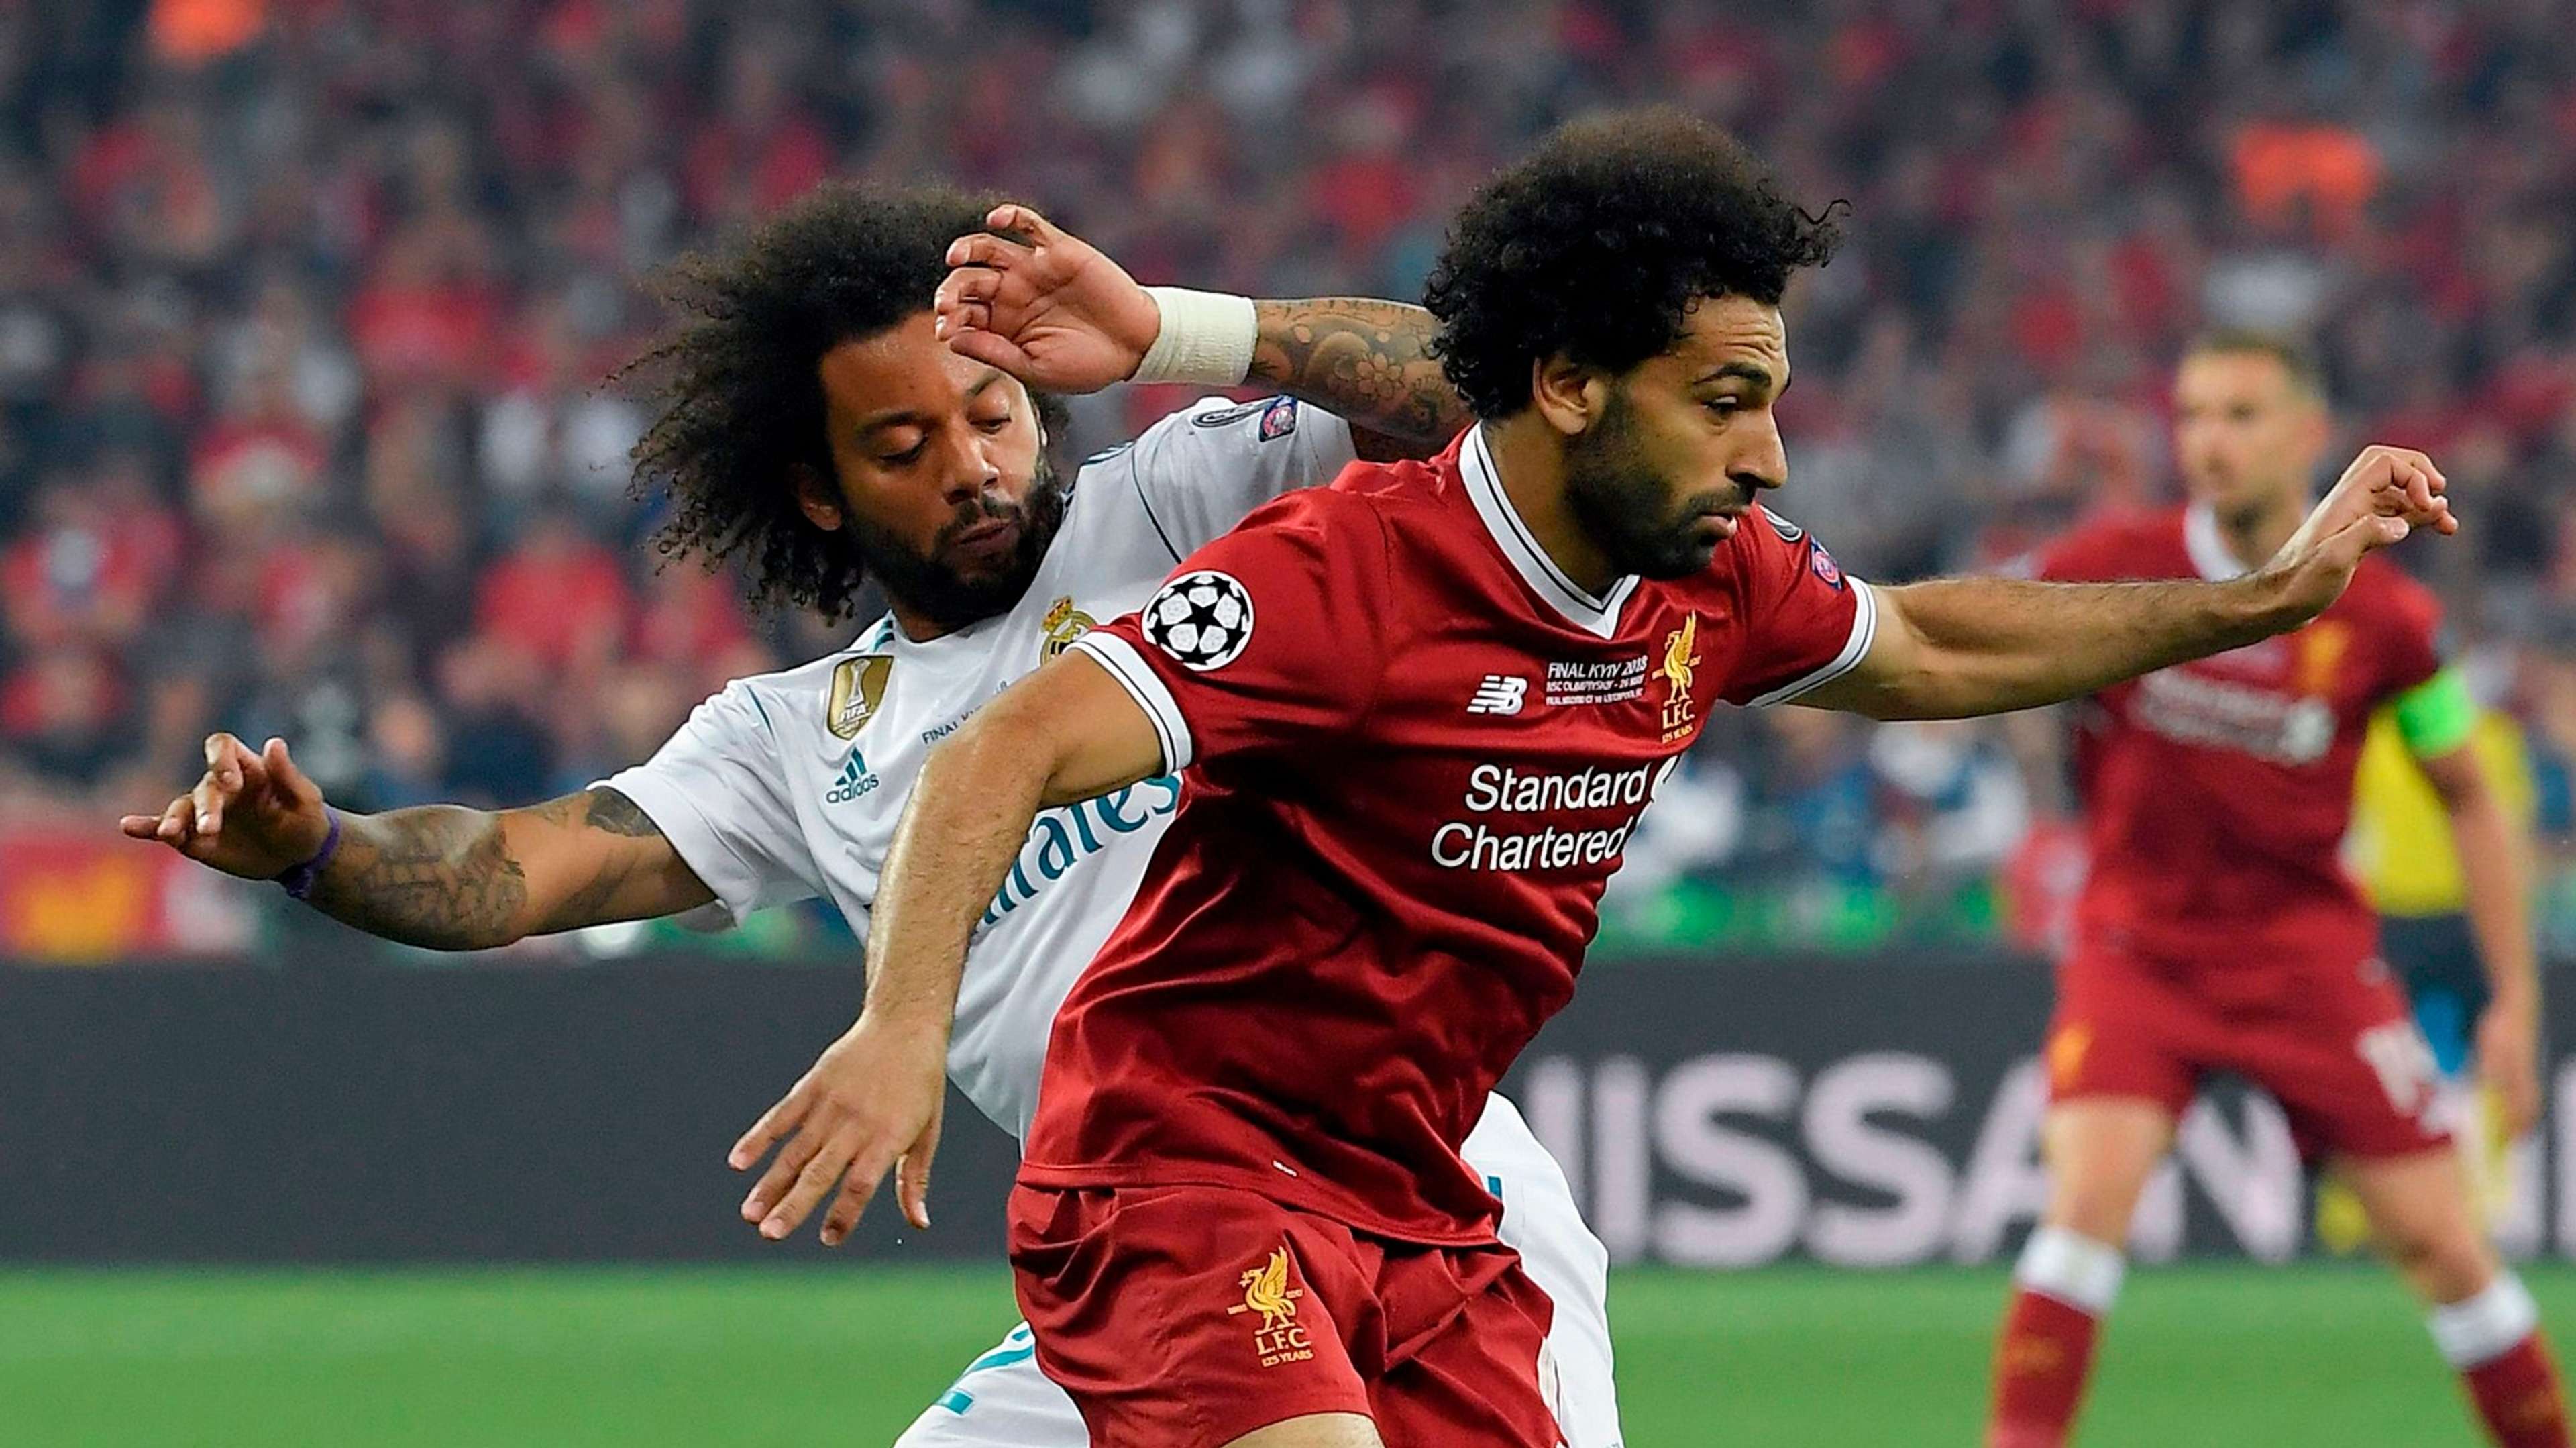 Marcelo Mohamed Salah Real Madrid Liverpool Champions League final 260518